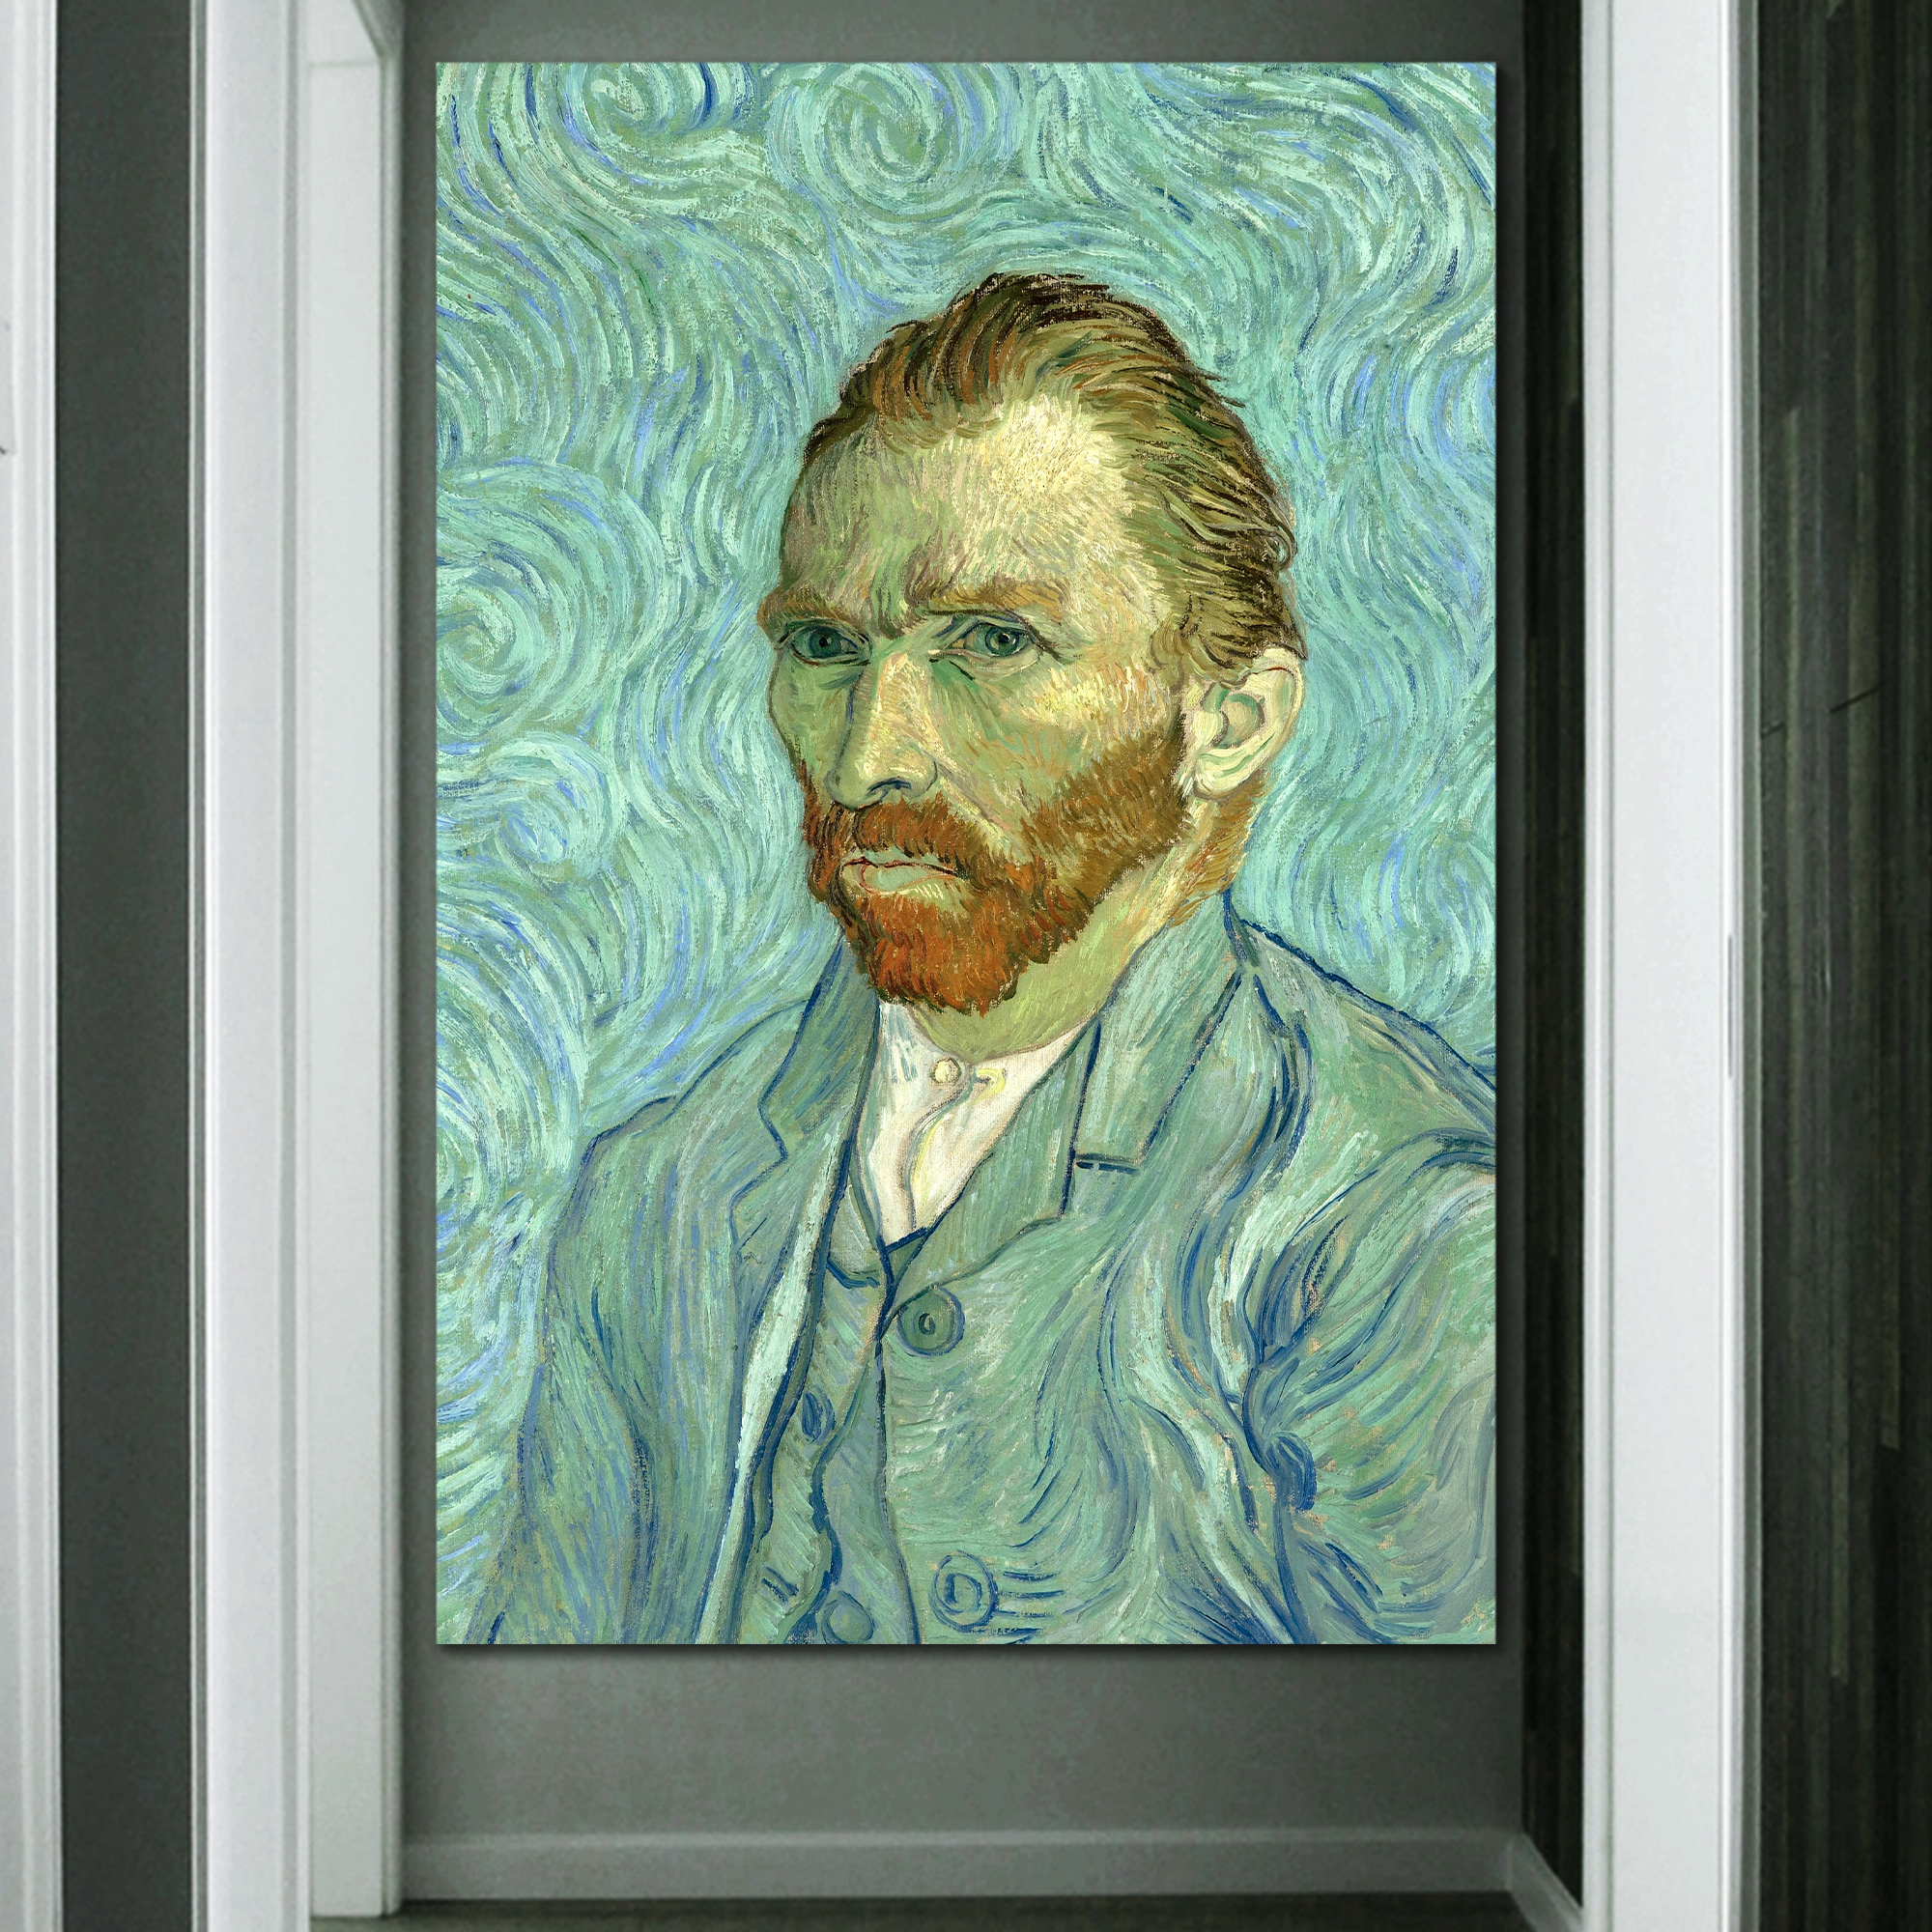 Self Portrait by Van Gogh Giclee Canvas Prints Wrapped Gallery Wall Art | Stretched and Framed Ready to Hang - 12